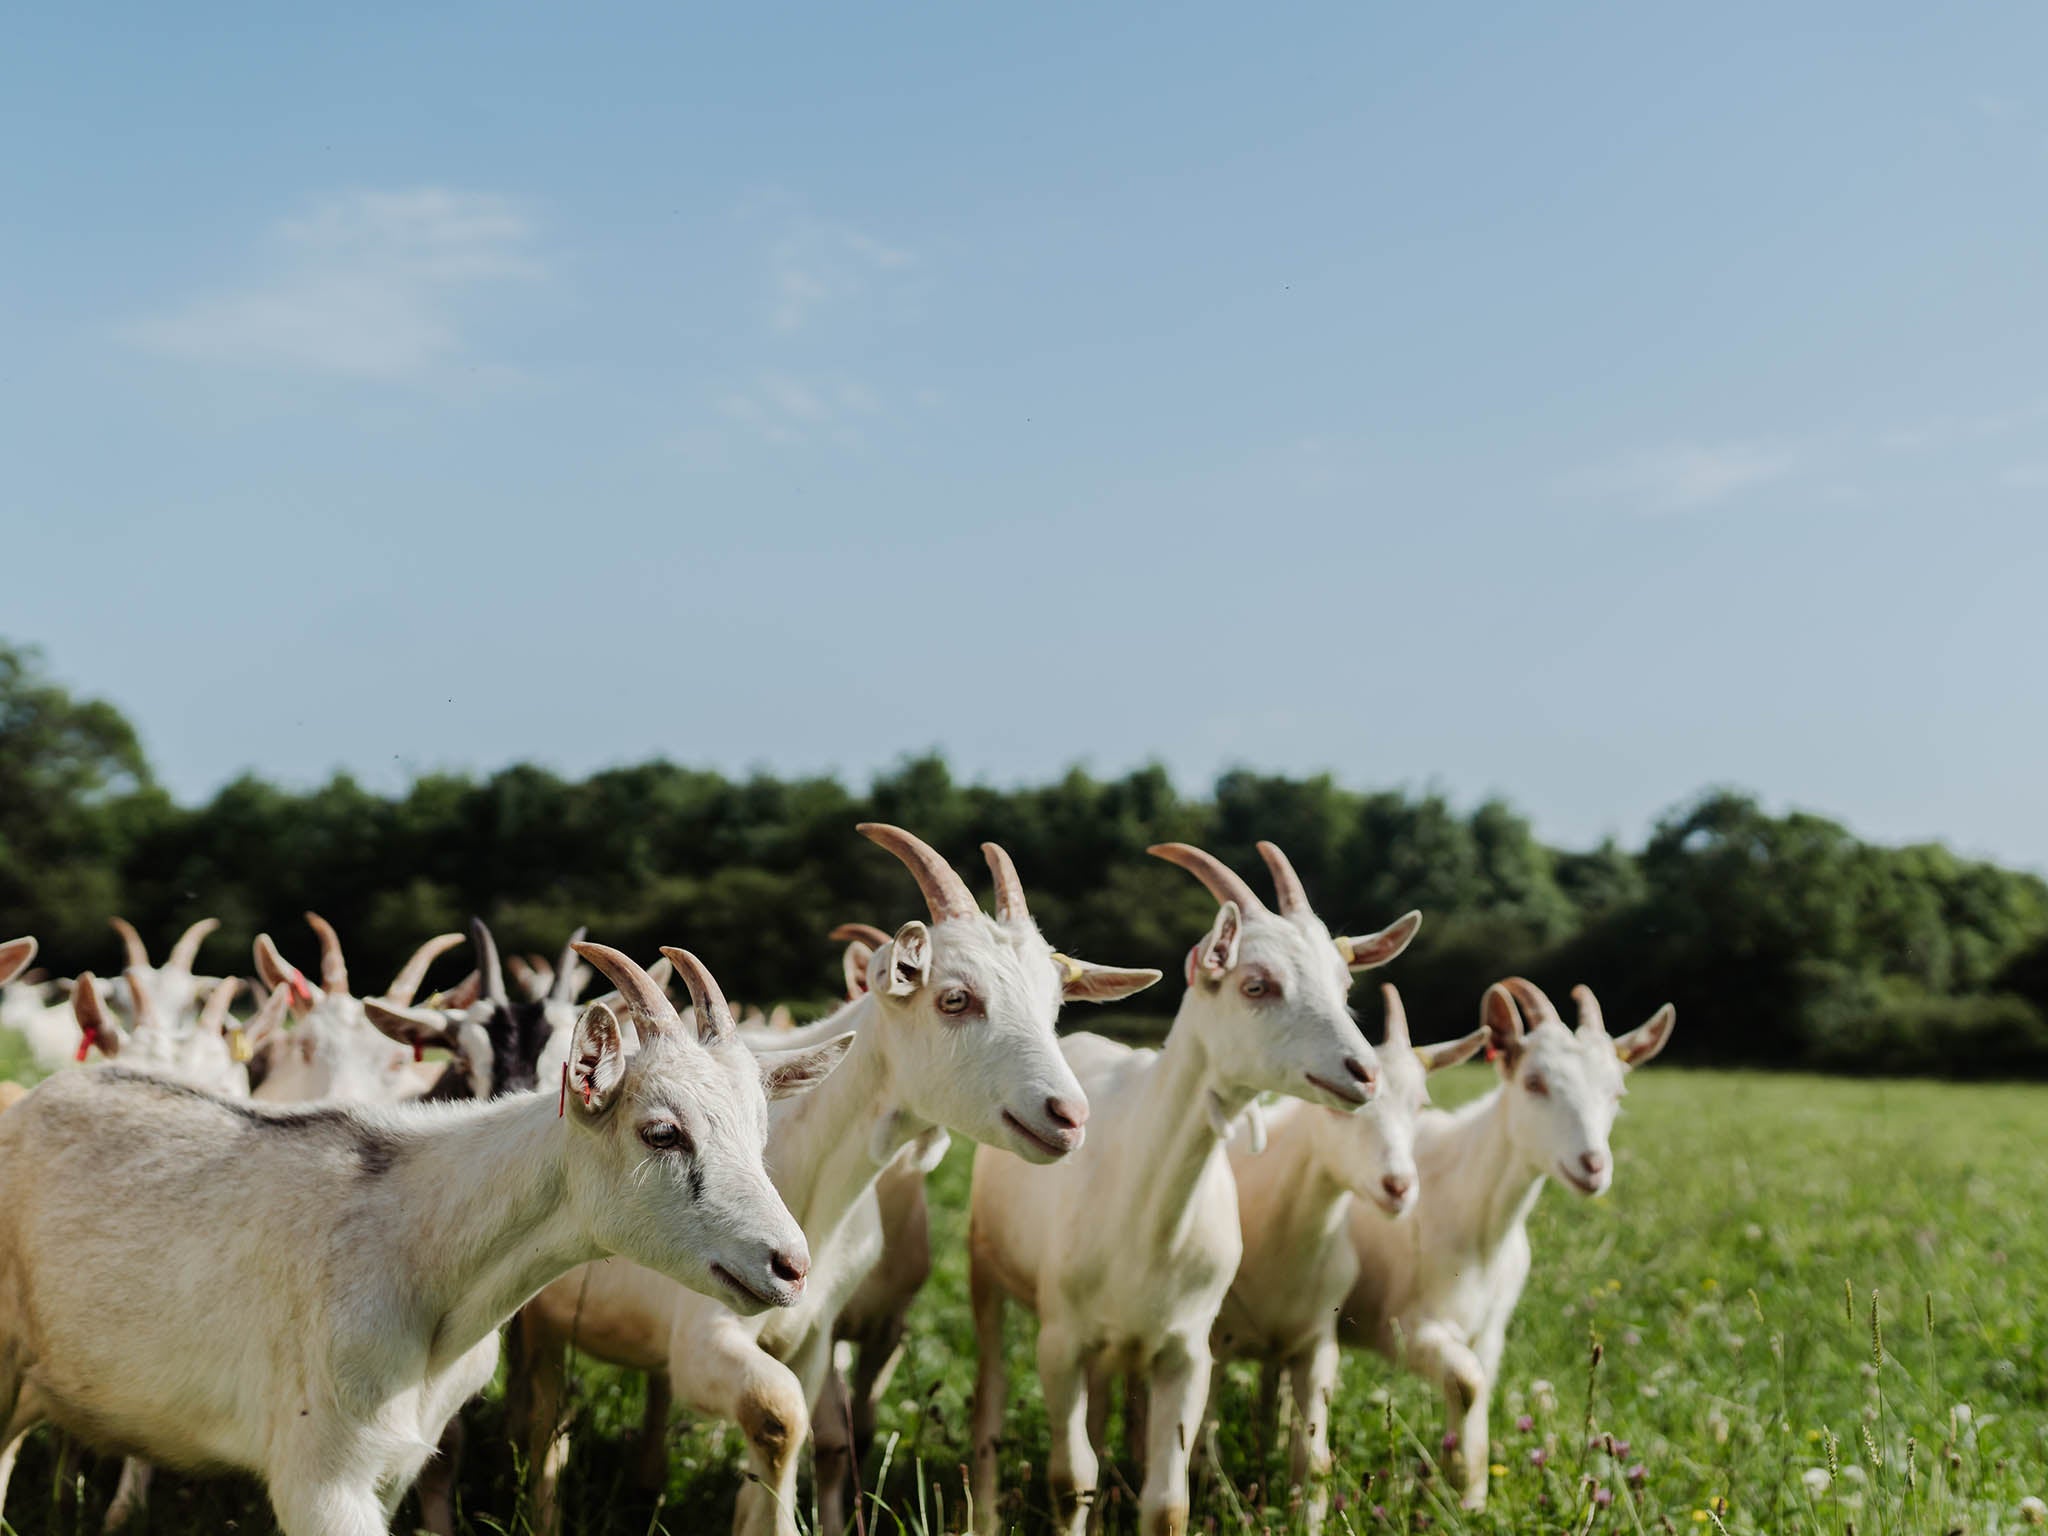 The goats at Long Meadow farm in Worcestershire spend their whole lives outside